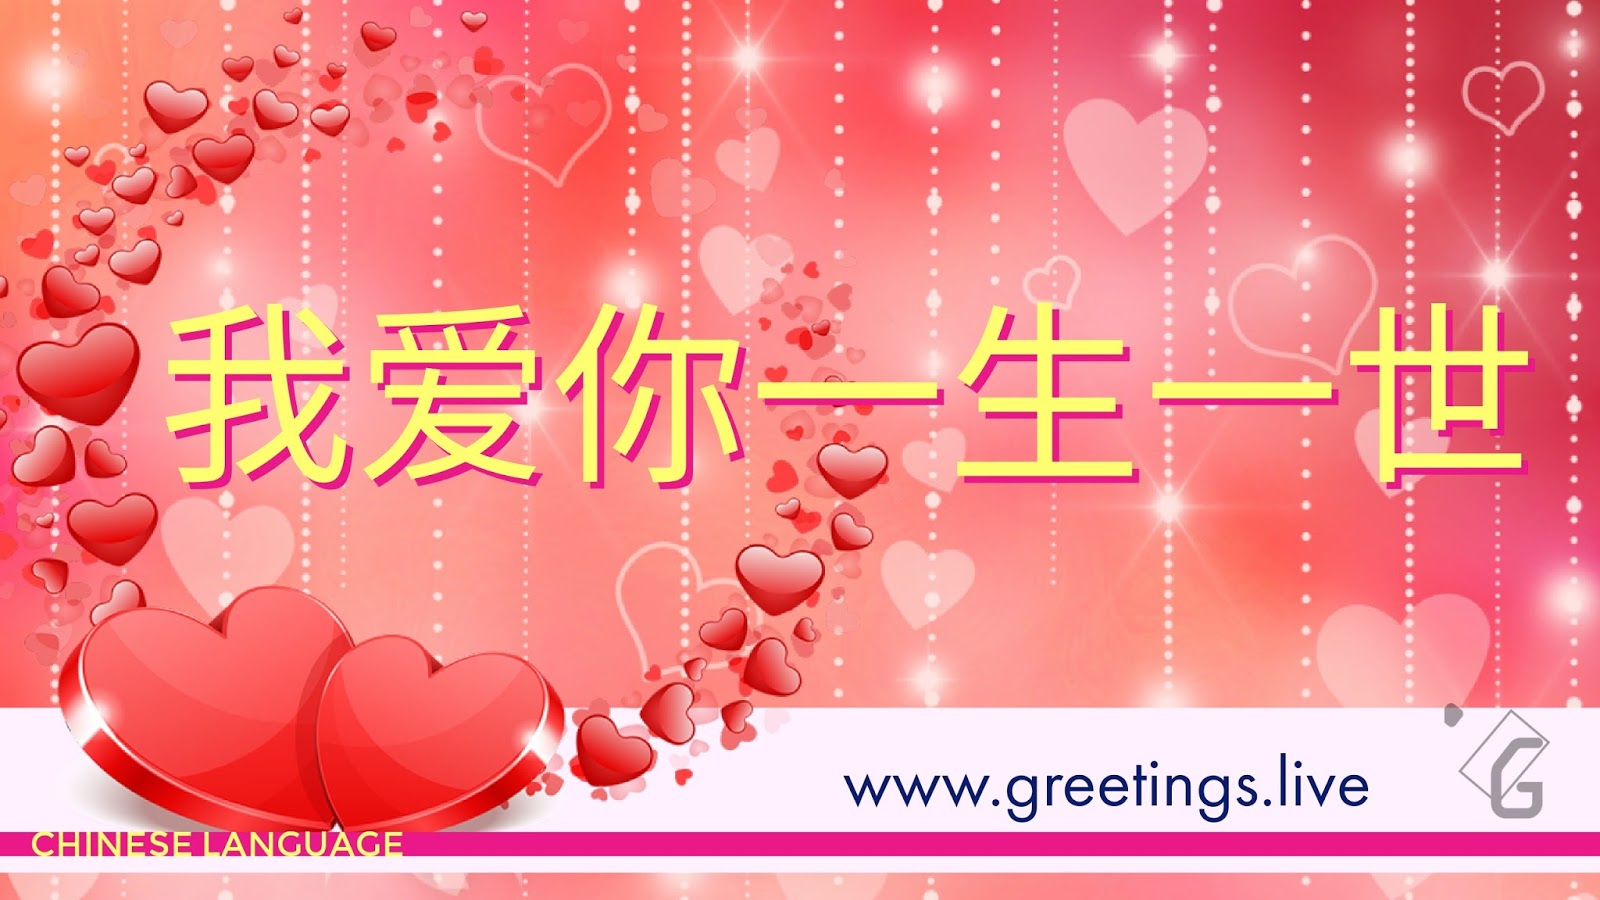 Greetings Live Free Daily Greetings Pictures Festival Gif Images I Love You Forever In Chinese Numbers